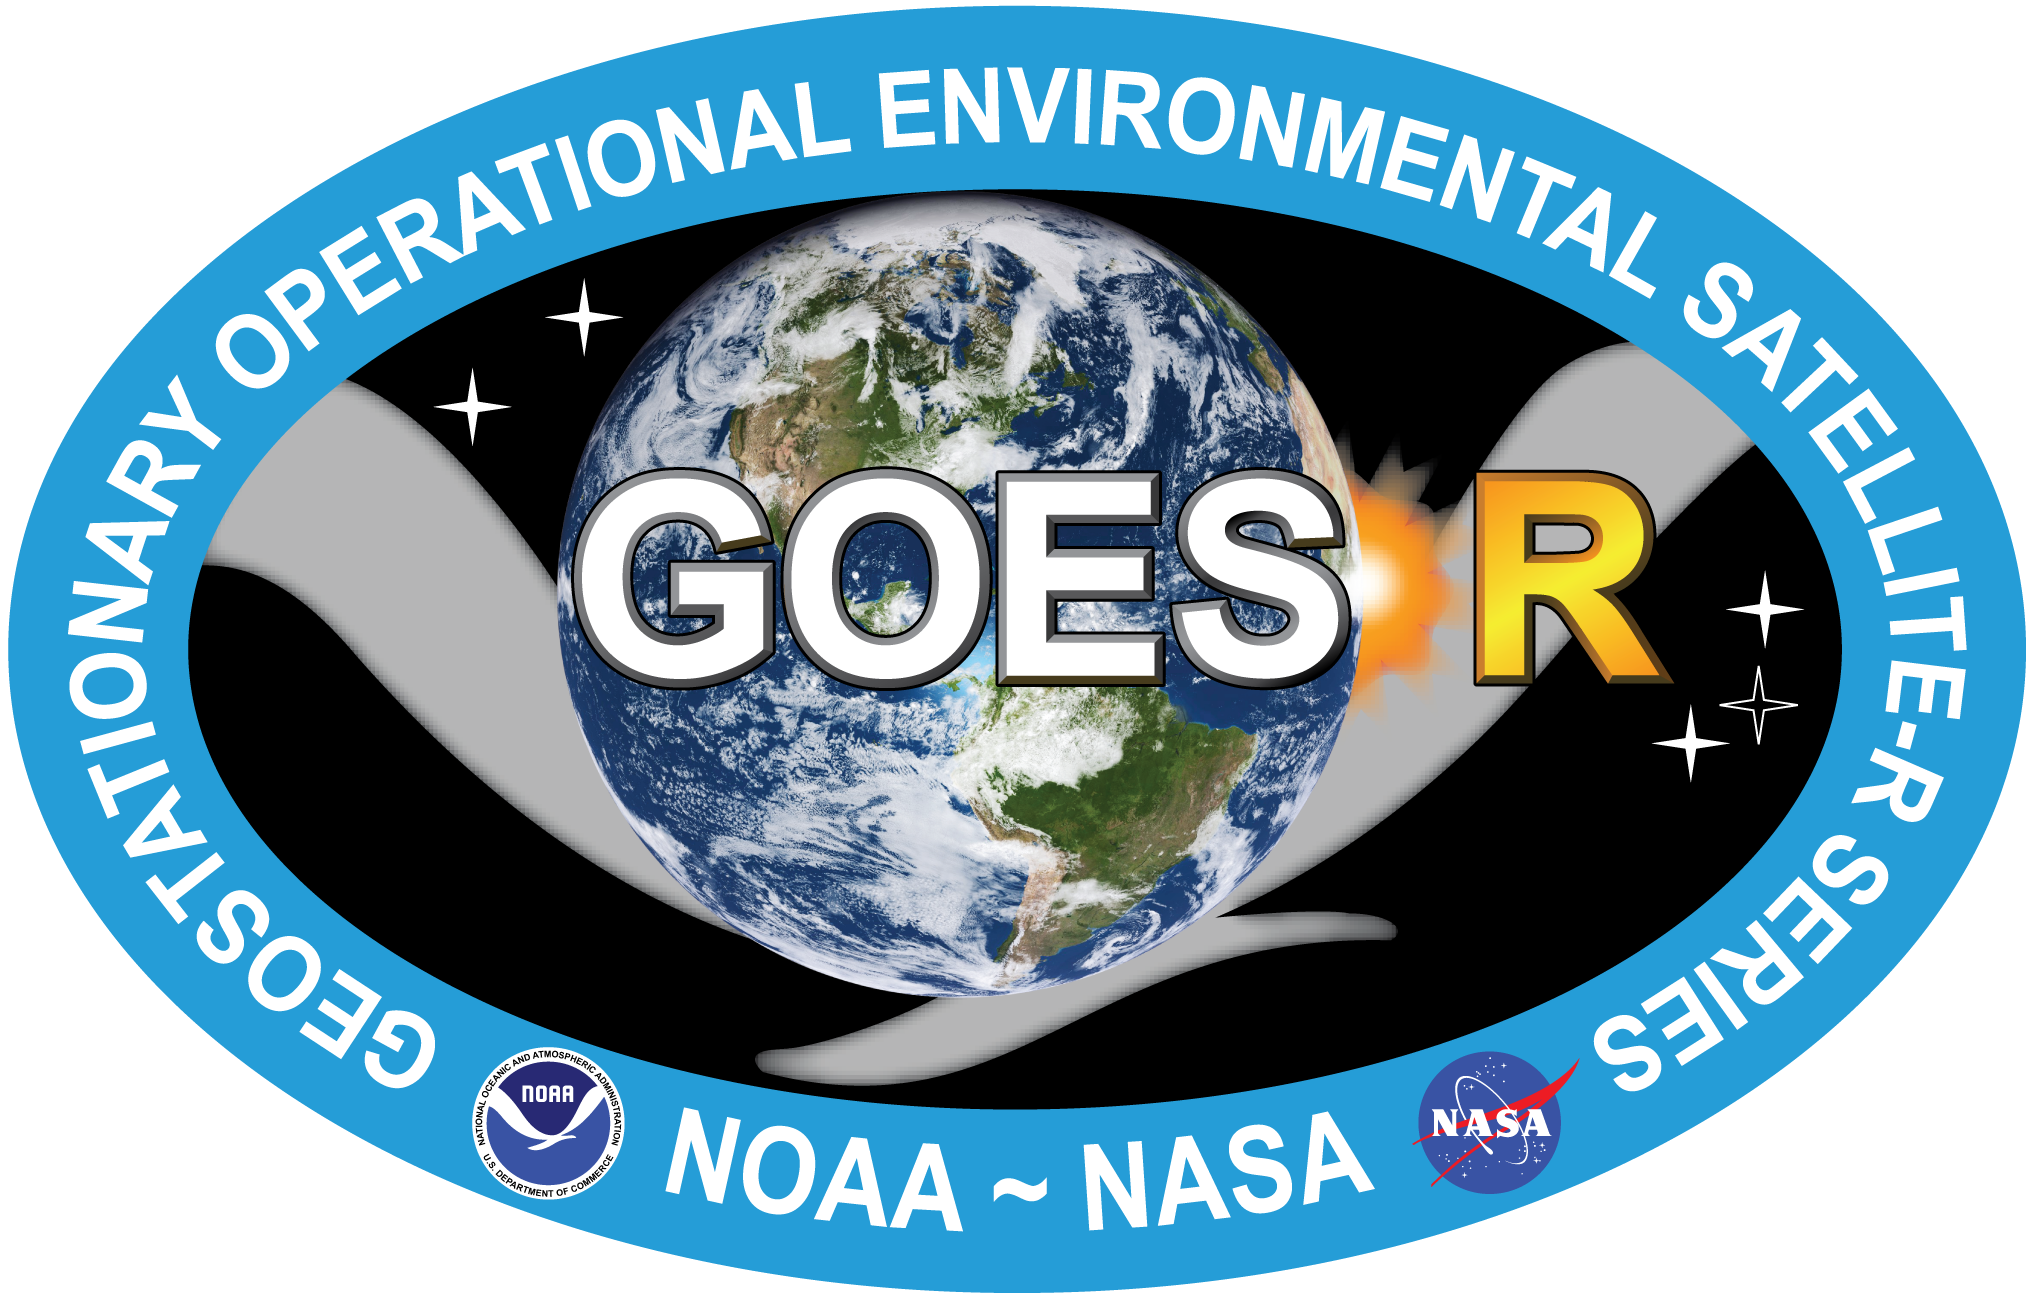 GOES-R Proving Ground Decal